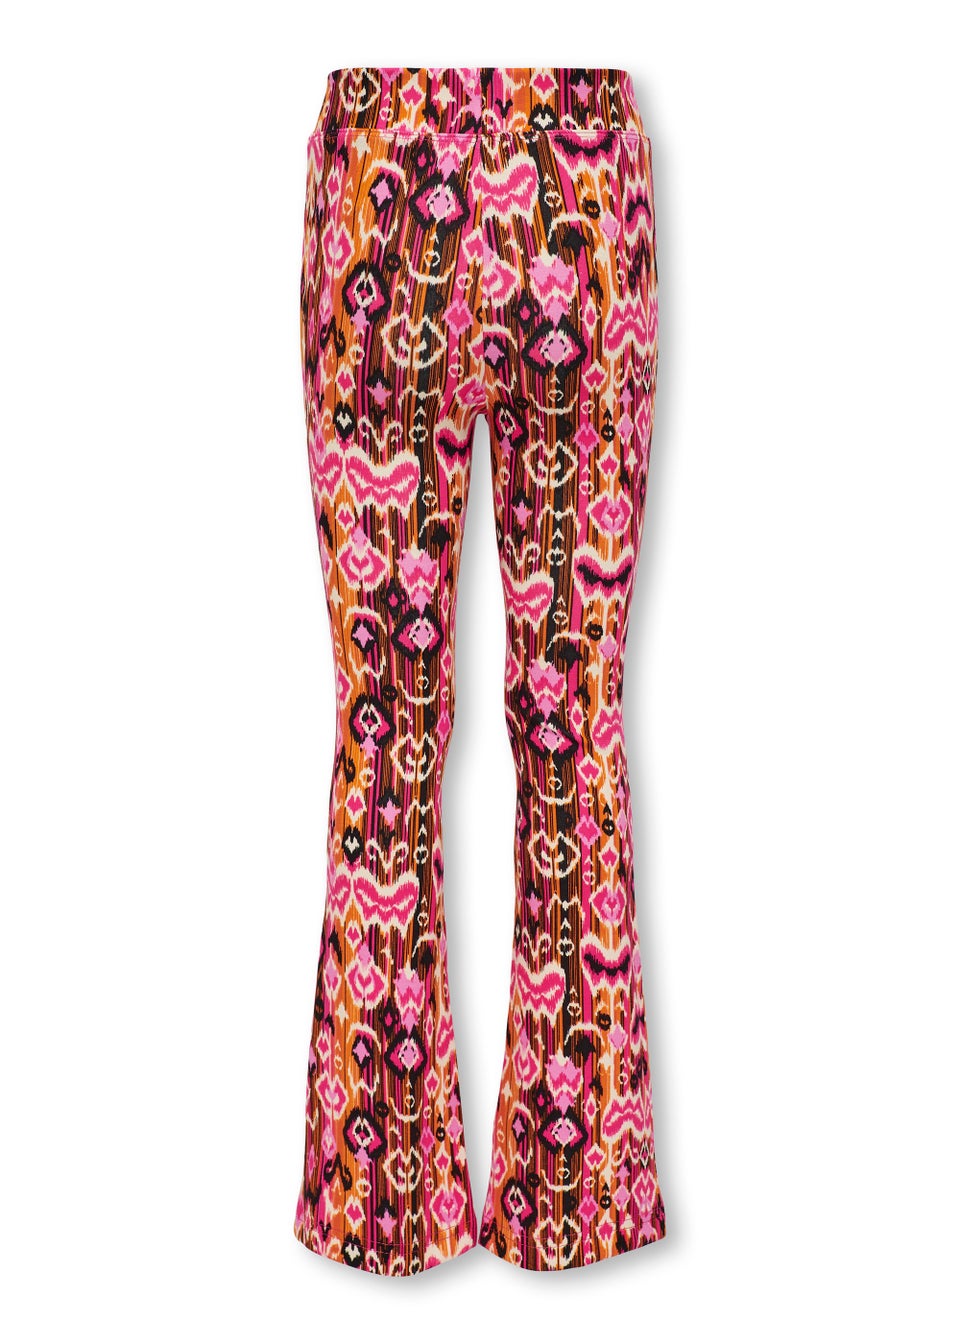 ONLY Kids Orange Print Flared Trousers (6-14yrs)